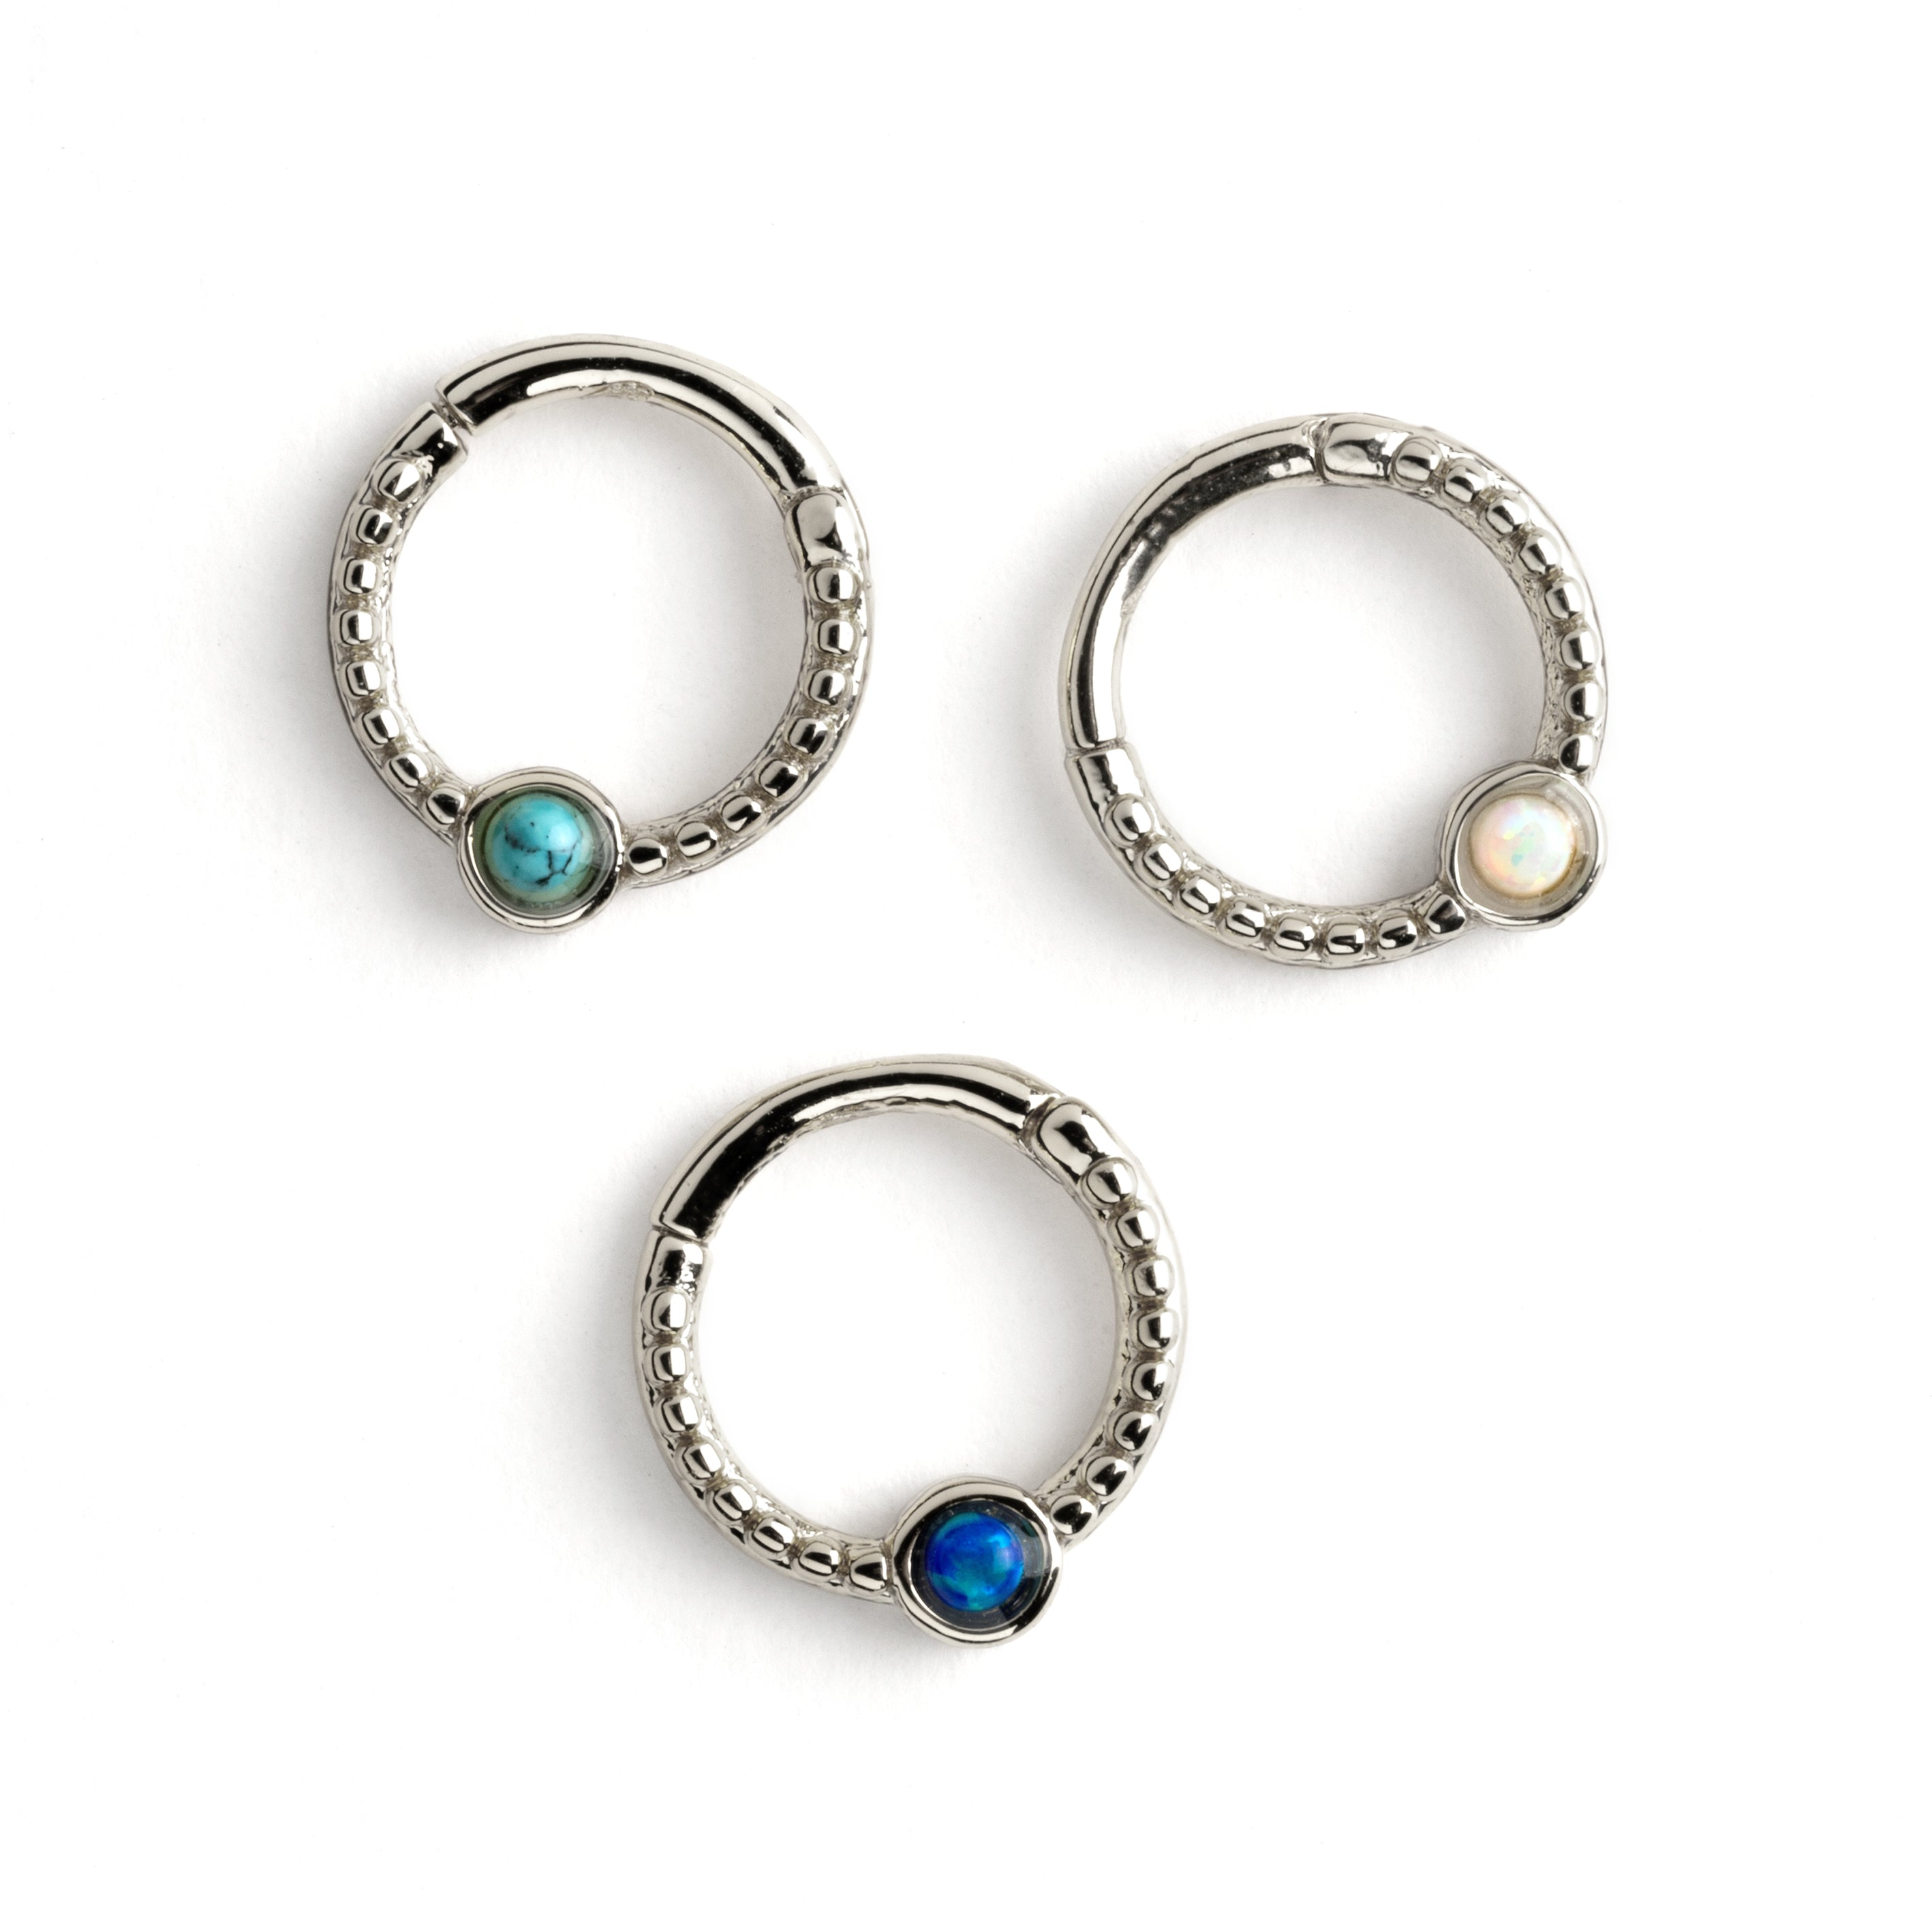 Dayaa surgical steel septum clicker with blue opal, white opal and turquoise frontal view 